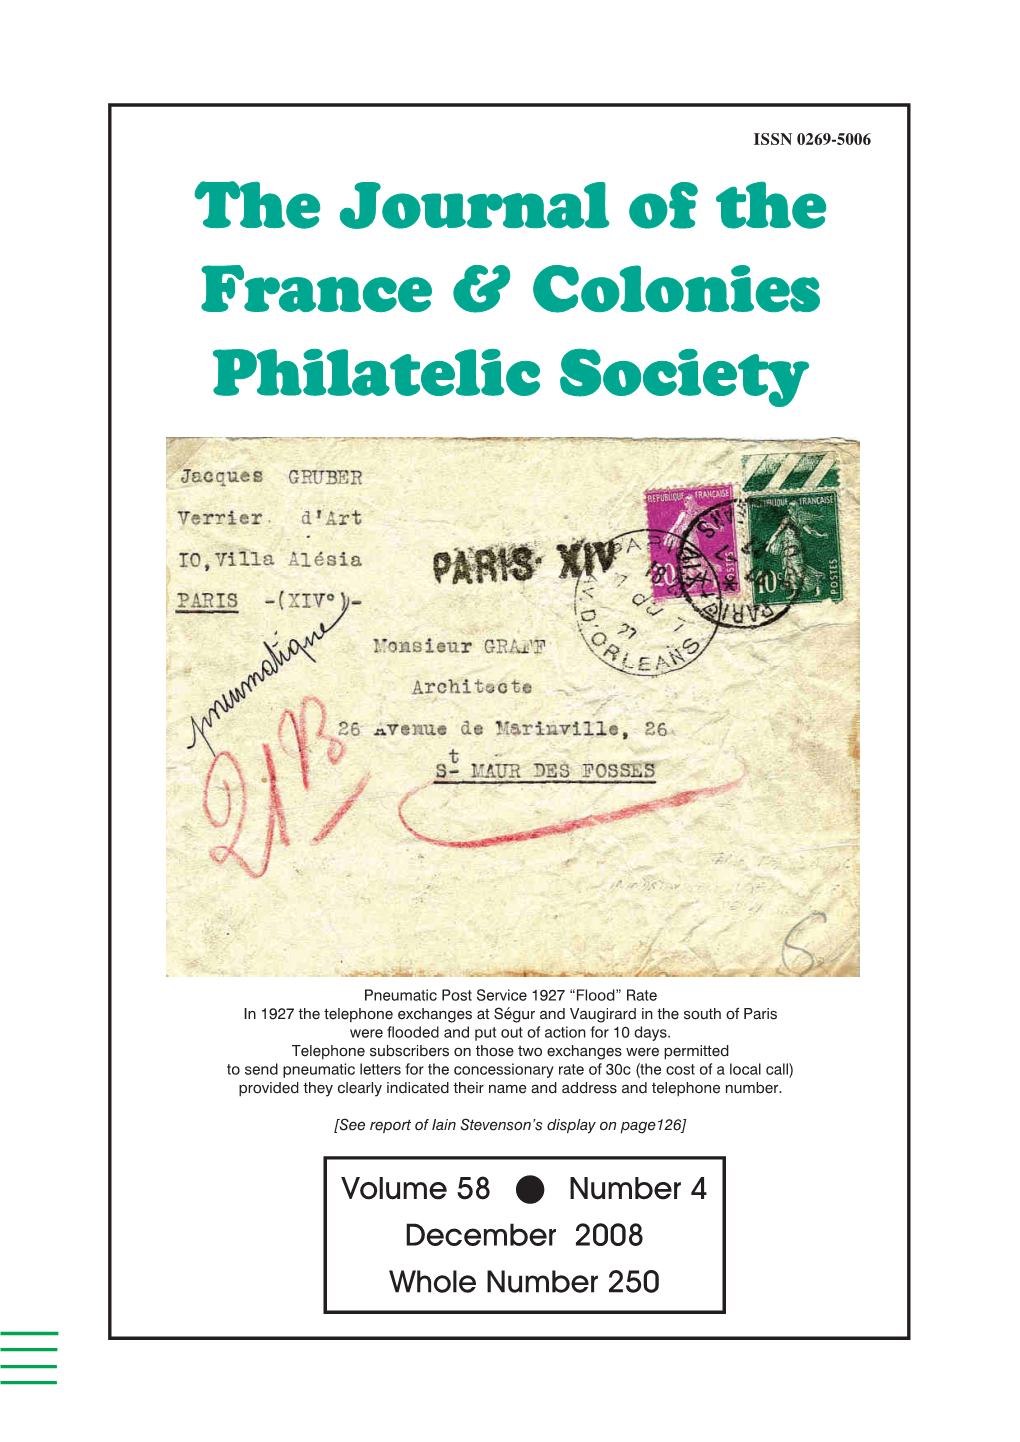 The Journal of the France & Colonies Philatelic Society